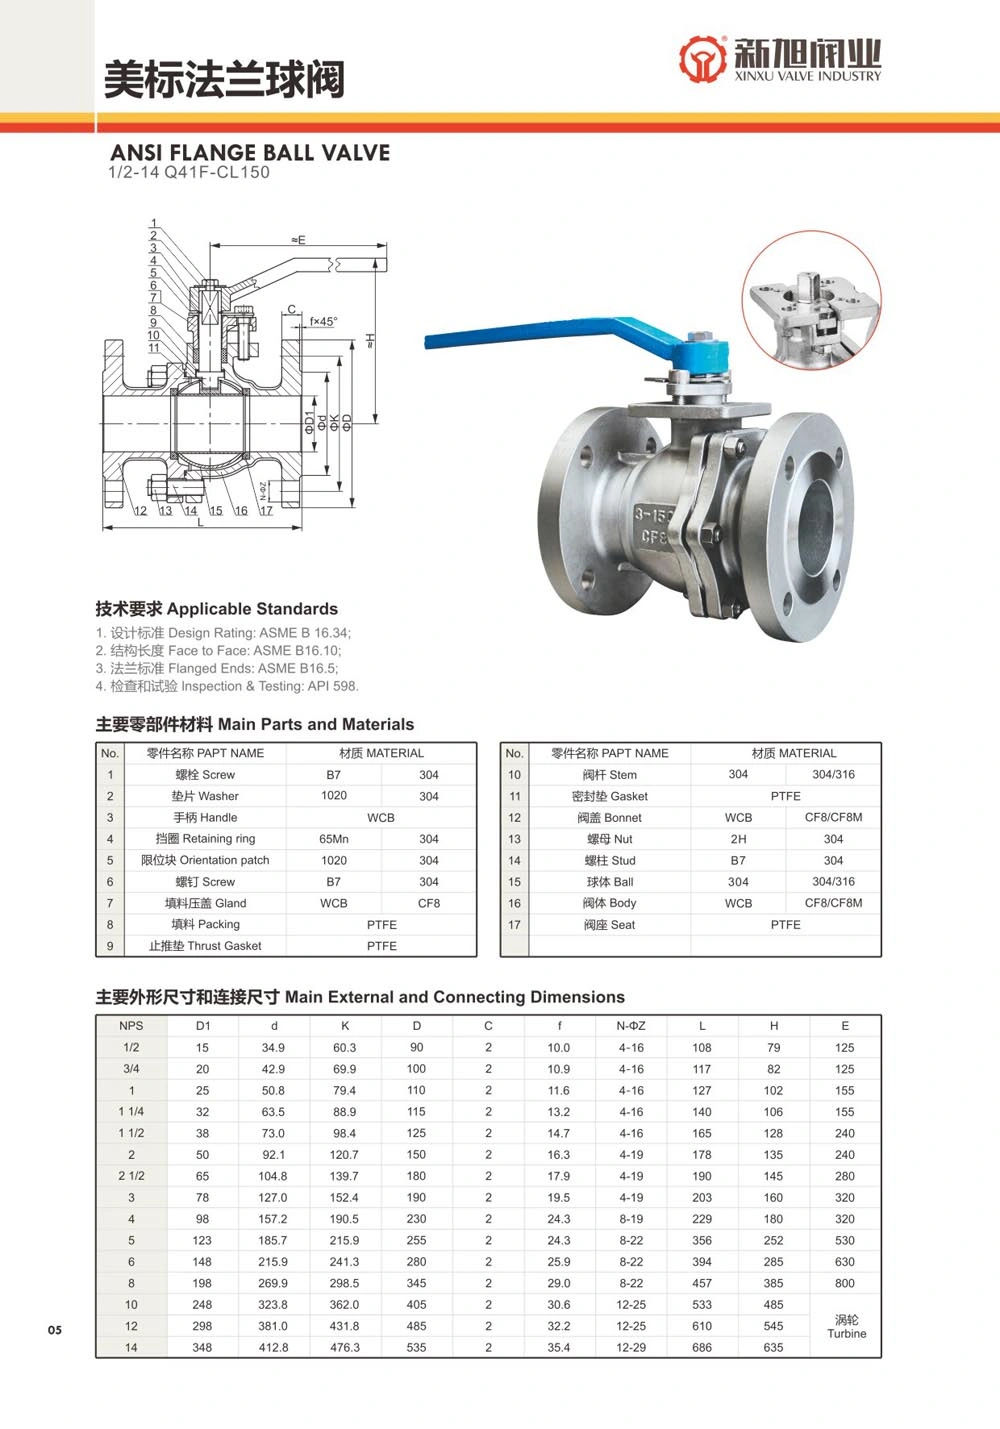 Class 150 Investment Casting Flange Stainless Steel Ball Valve Fire Safe Wcb/CF8/CF8m